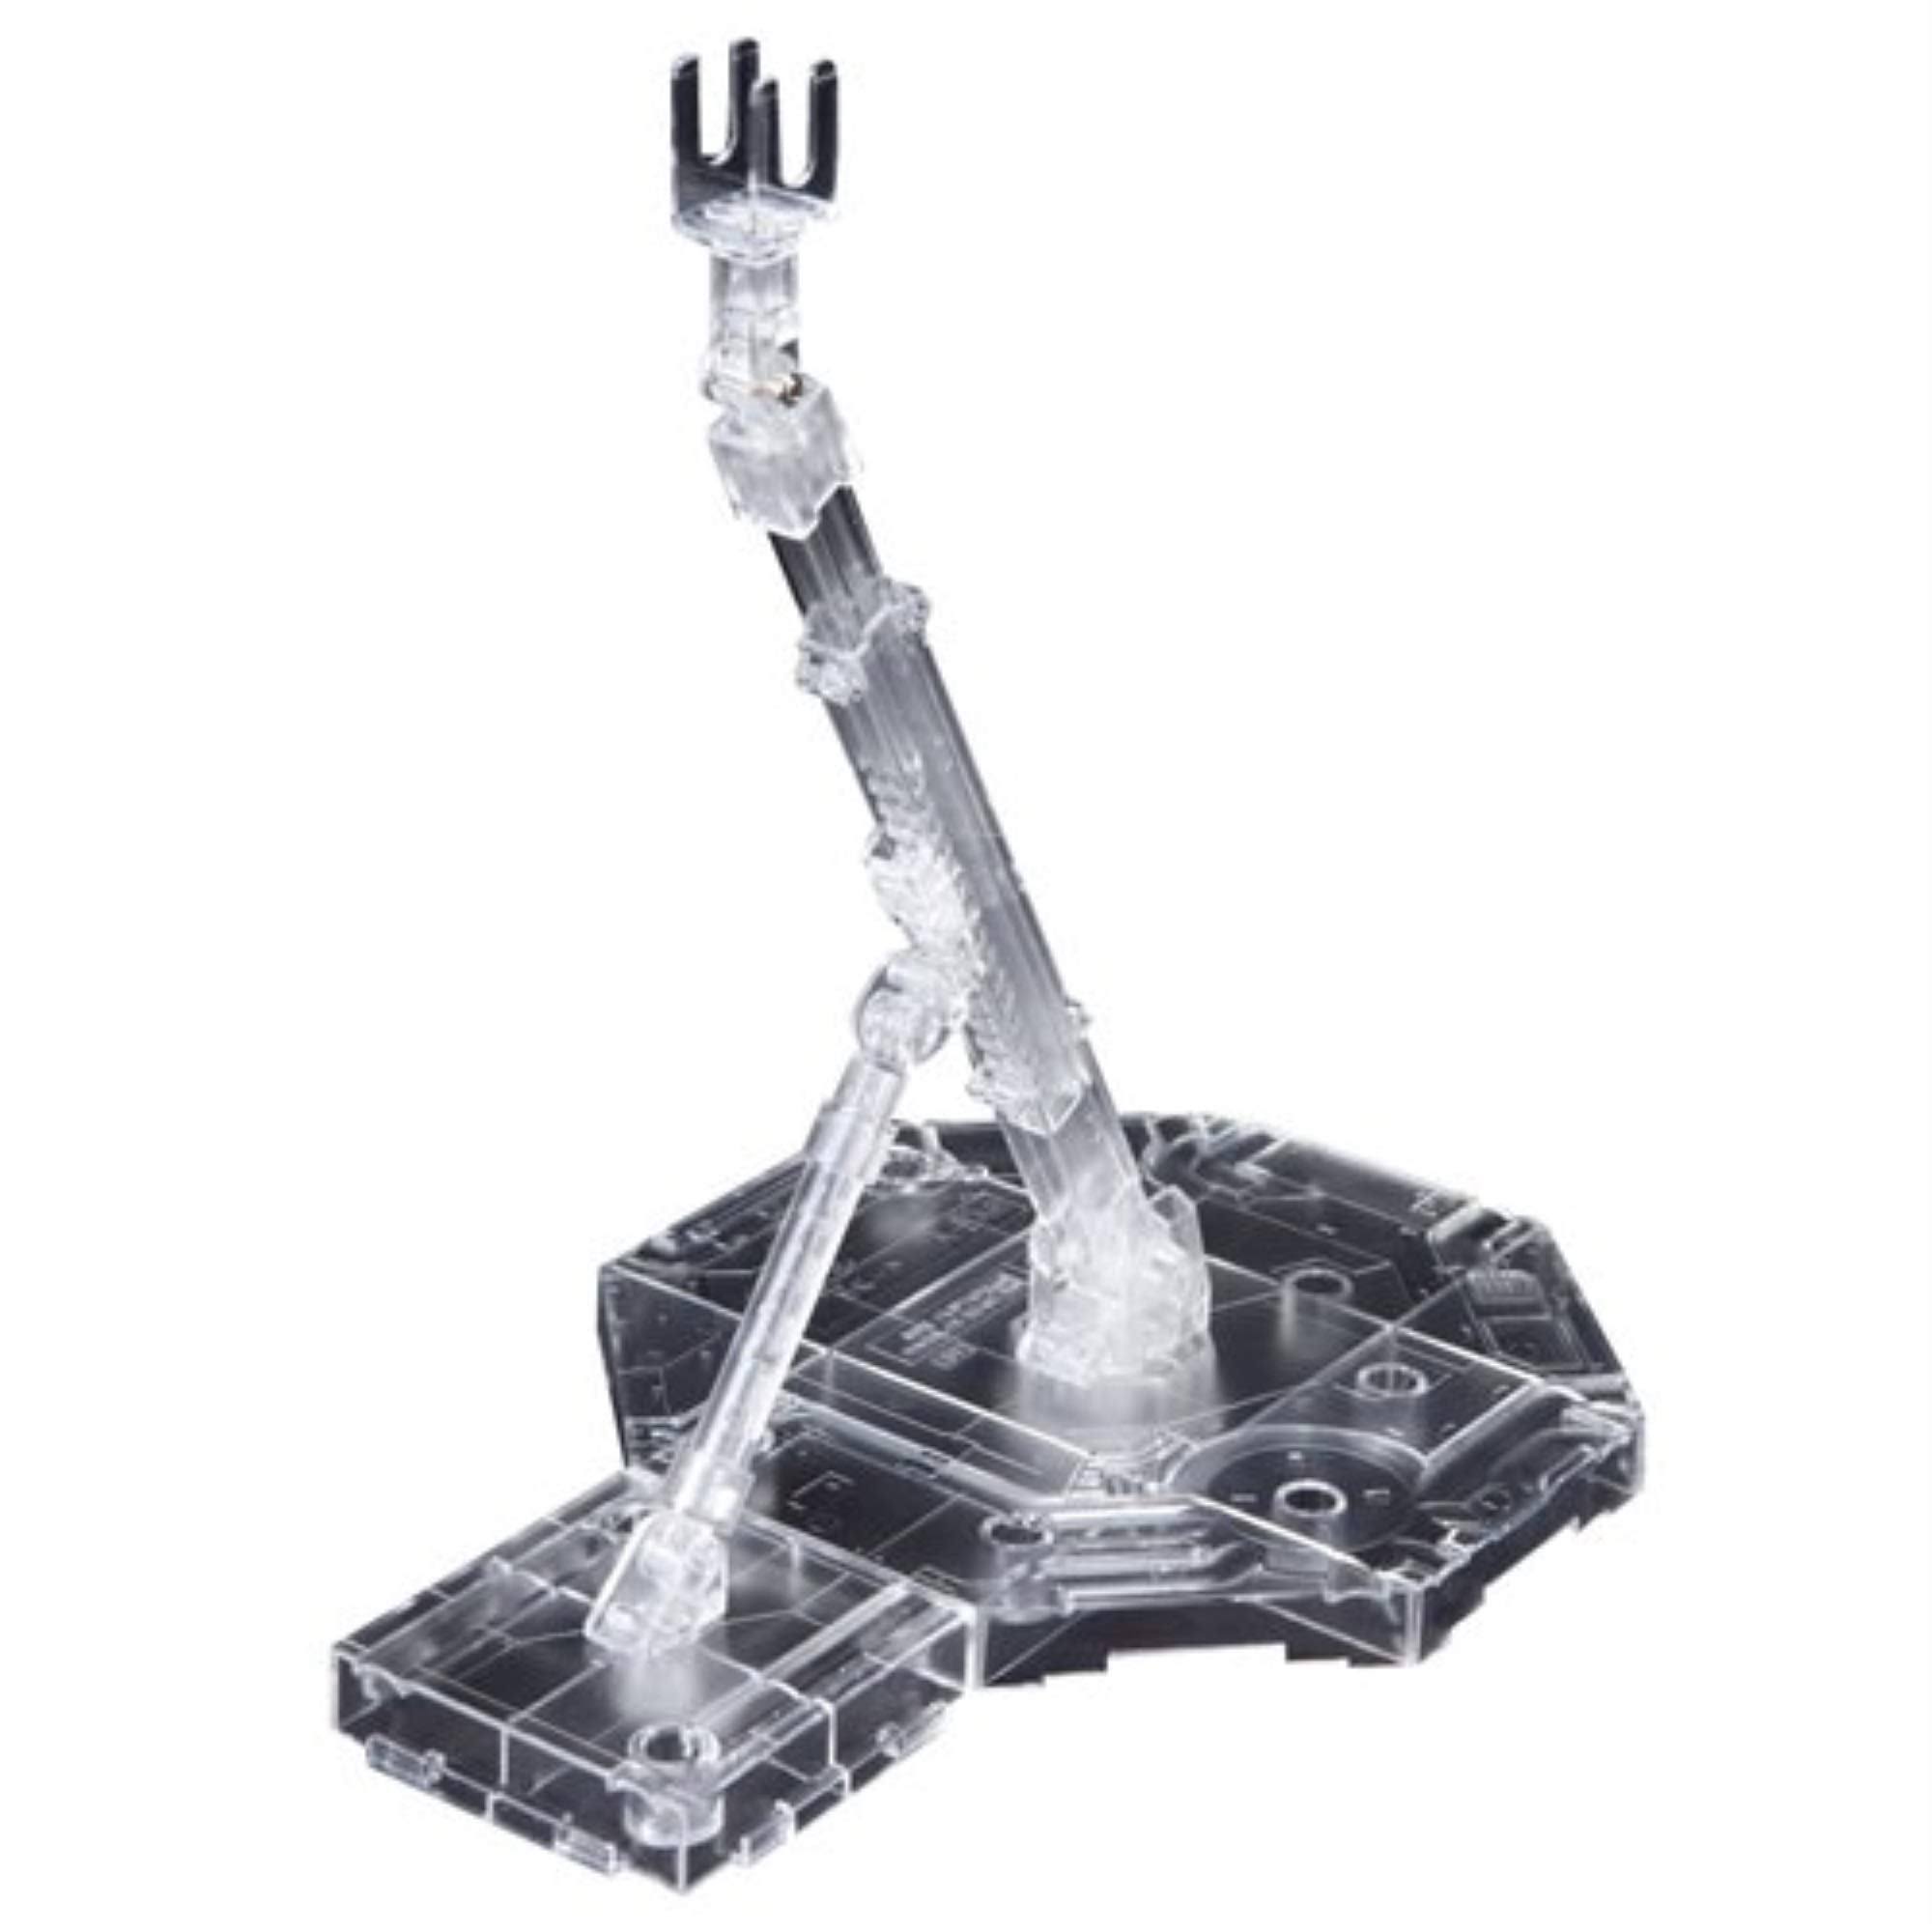 Bandai Hobby Action Base Toy Figure - Clear, Scale 1/100